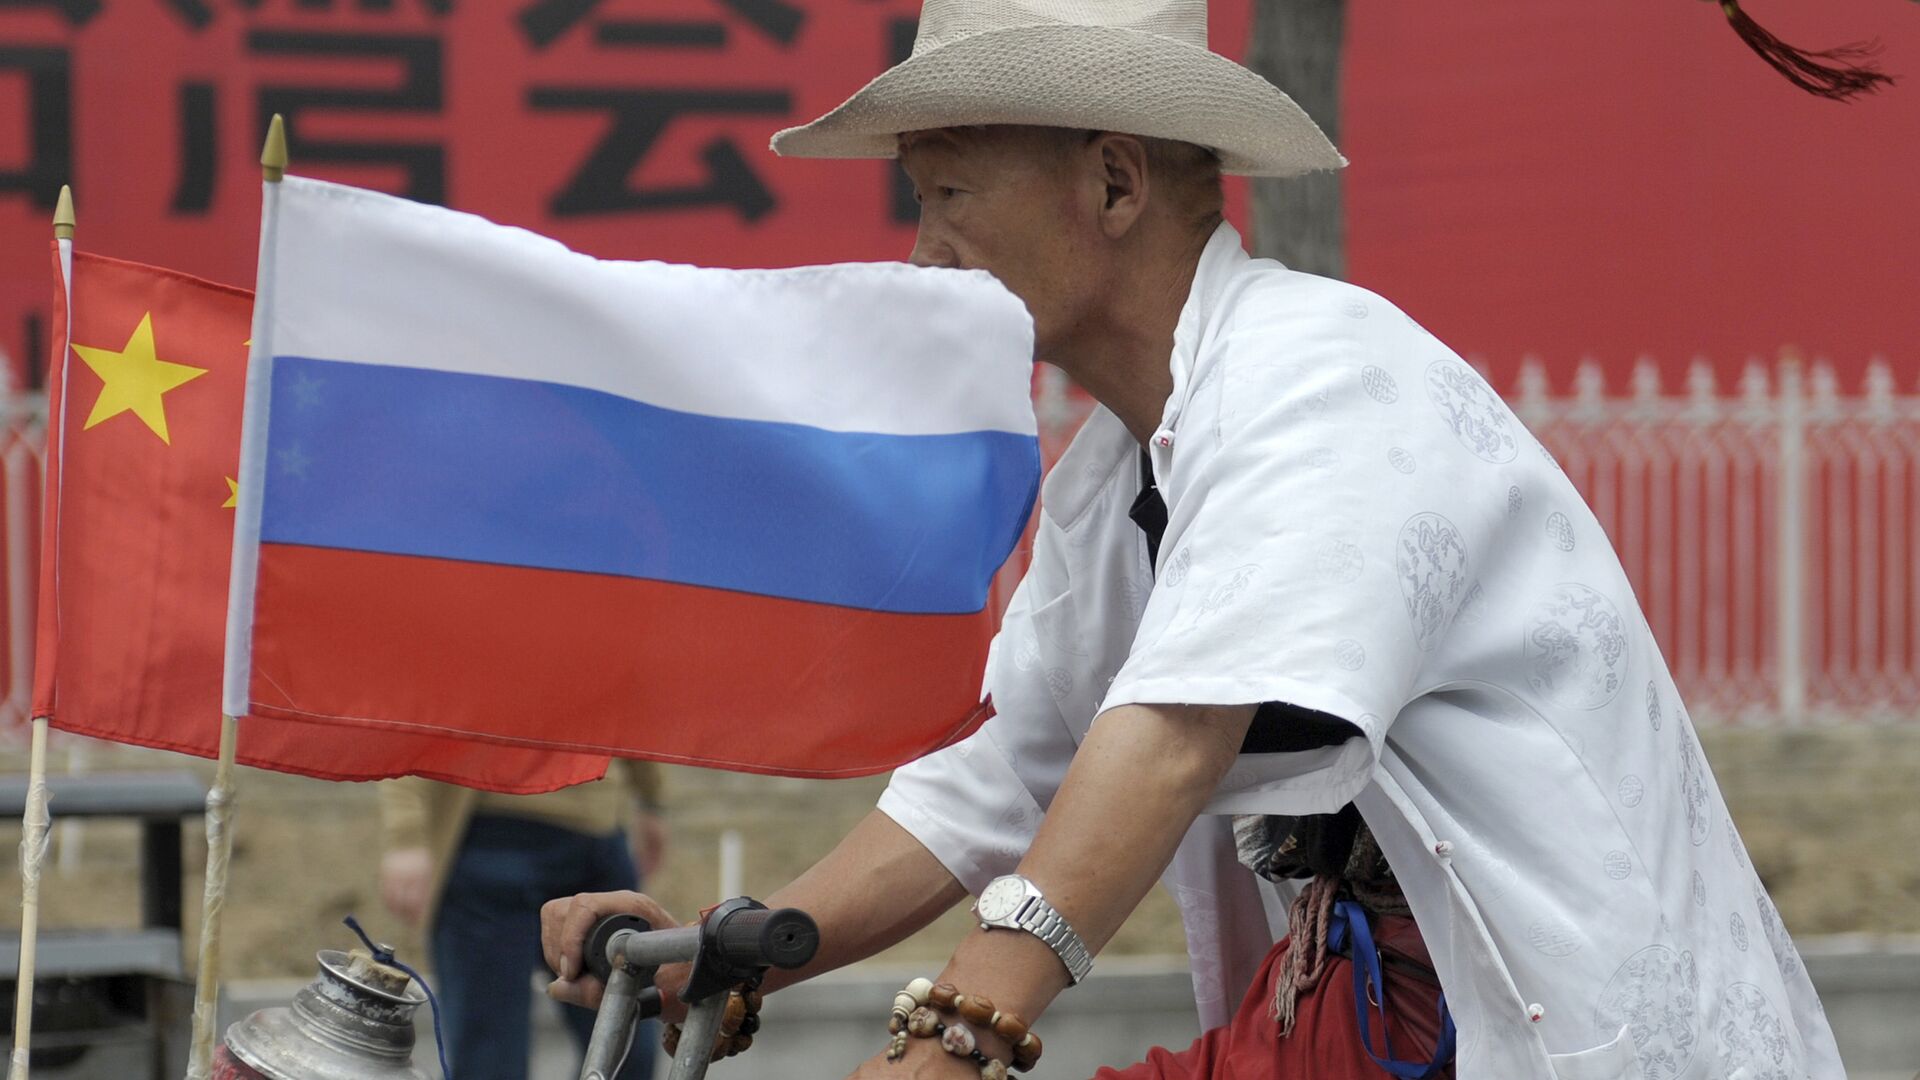 A man rides with a Russian flag displayed on his pedicab in Beijing's Russian trade district of Yabaolu. (File) - Sputnik International, 1920, 30.12.2022